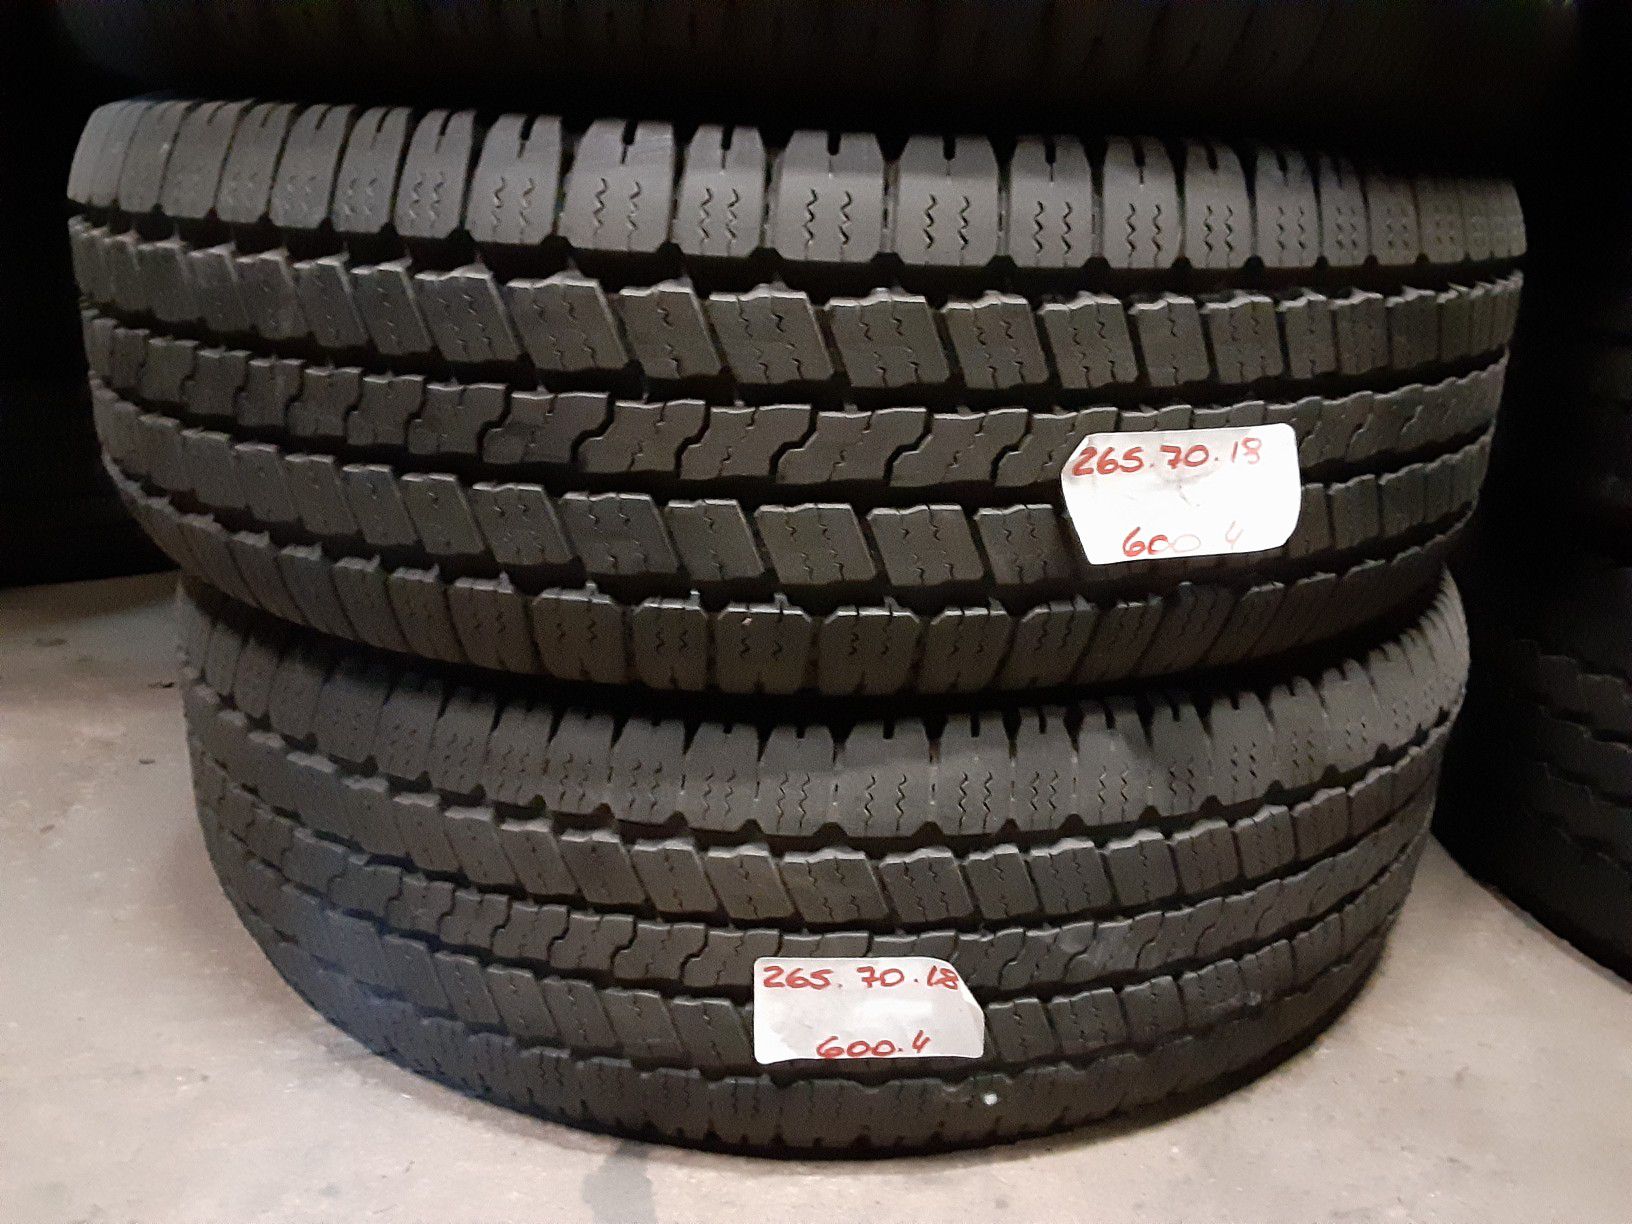 P265/70R18 GOODYEAR WRANGLER SR-A 265/70R18 MATCHING FULL SET USED TIRES  265 70 18 for Sale in Fort Lauderdale, FL - OfferUp